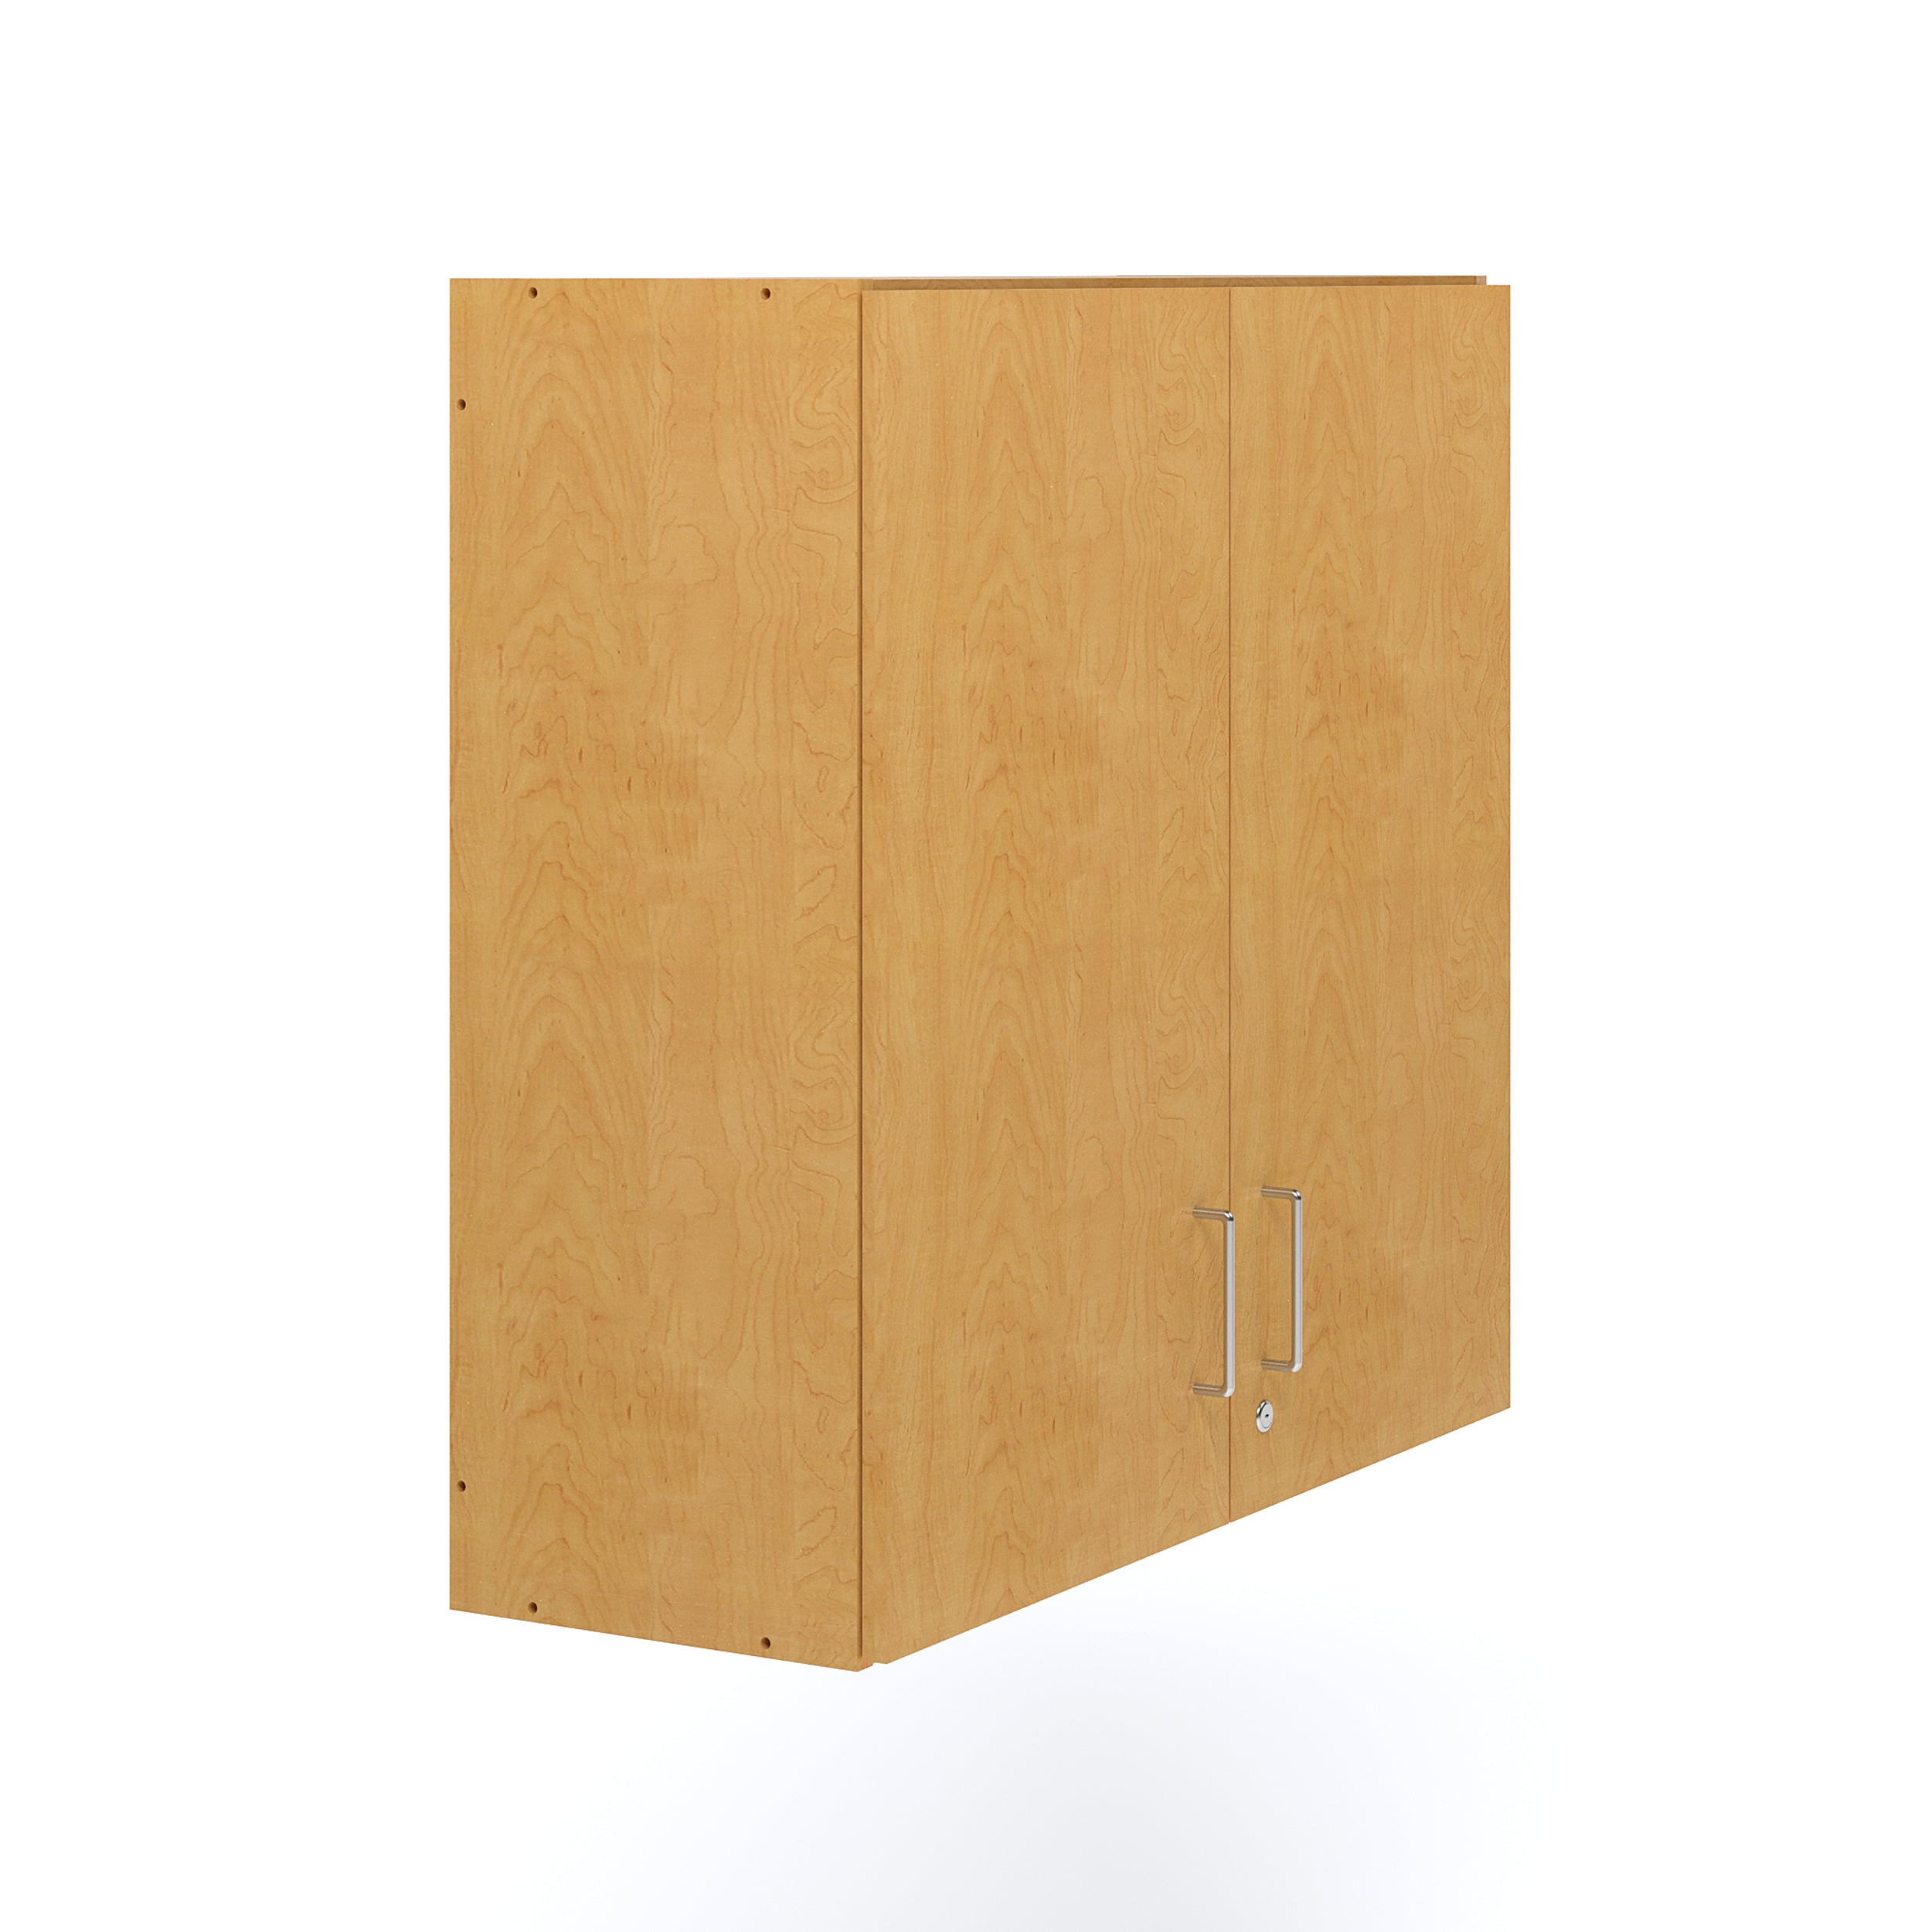 4-Compartment Wall Cabinet 37" Wide